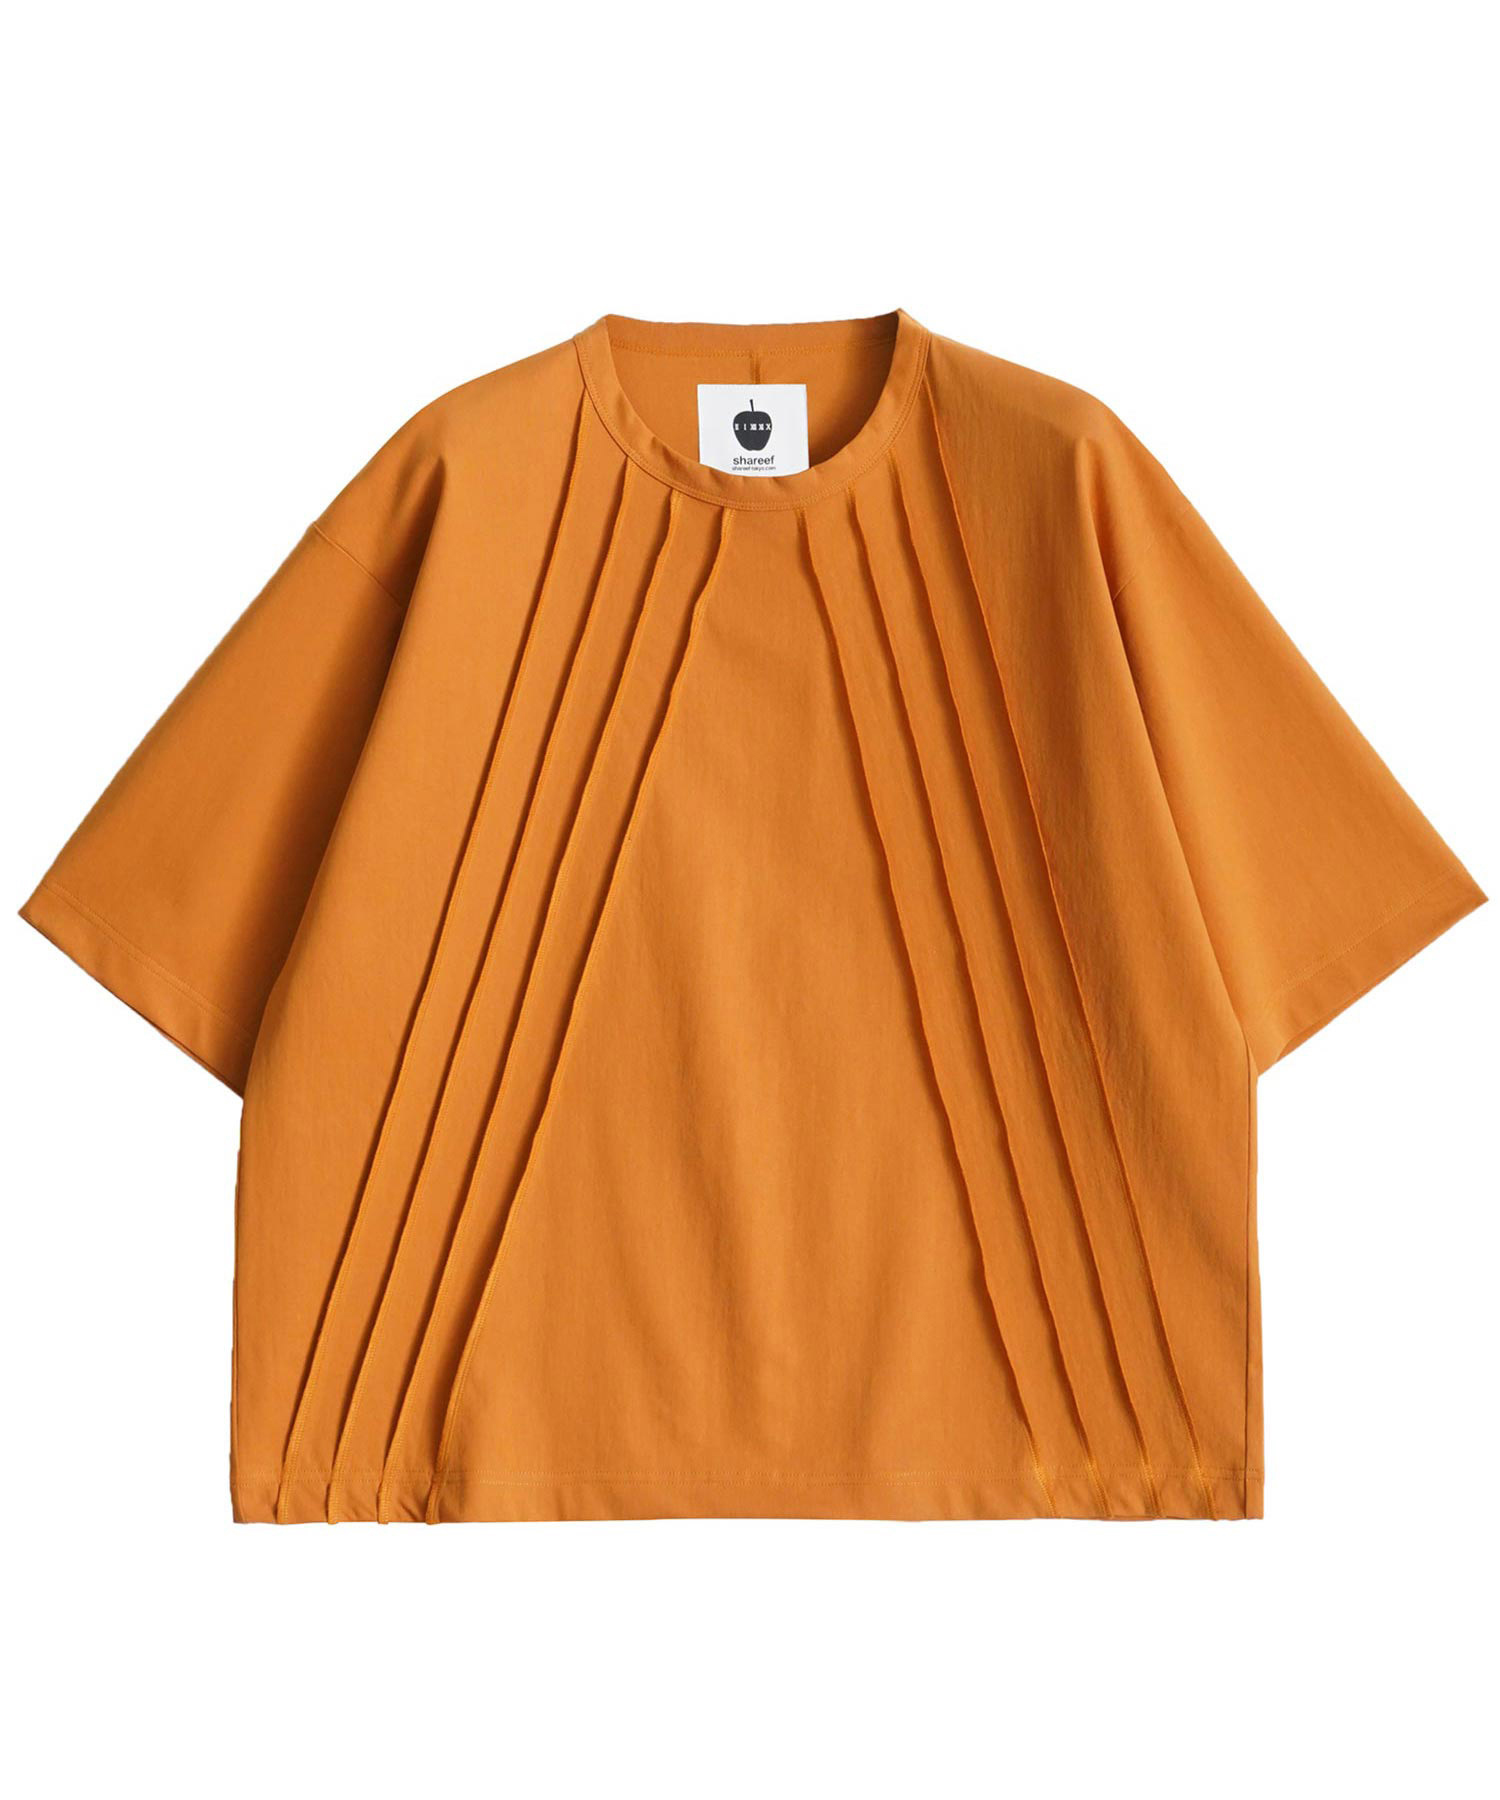 TRICOT FABRIC S/S T-SHIRTS